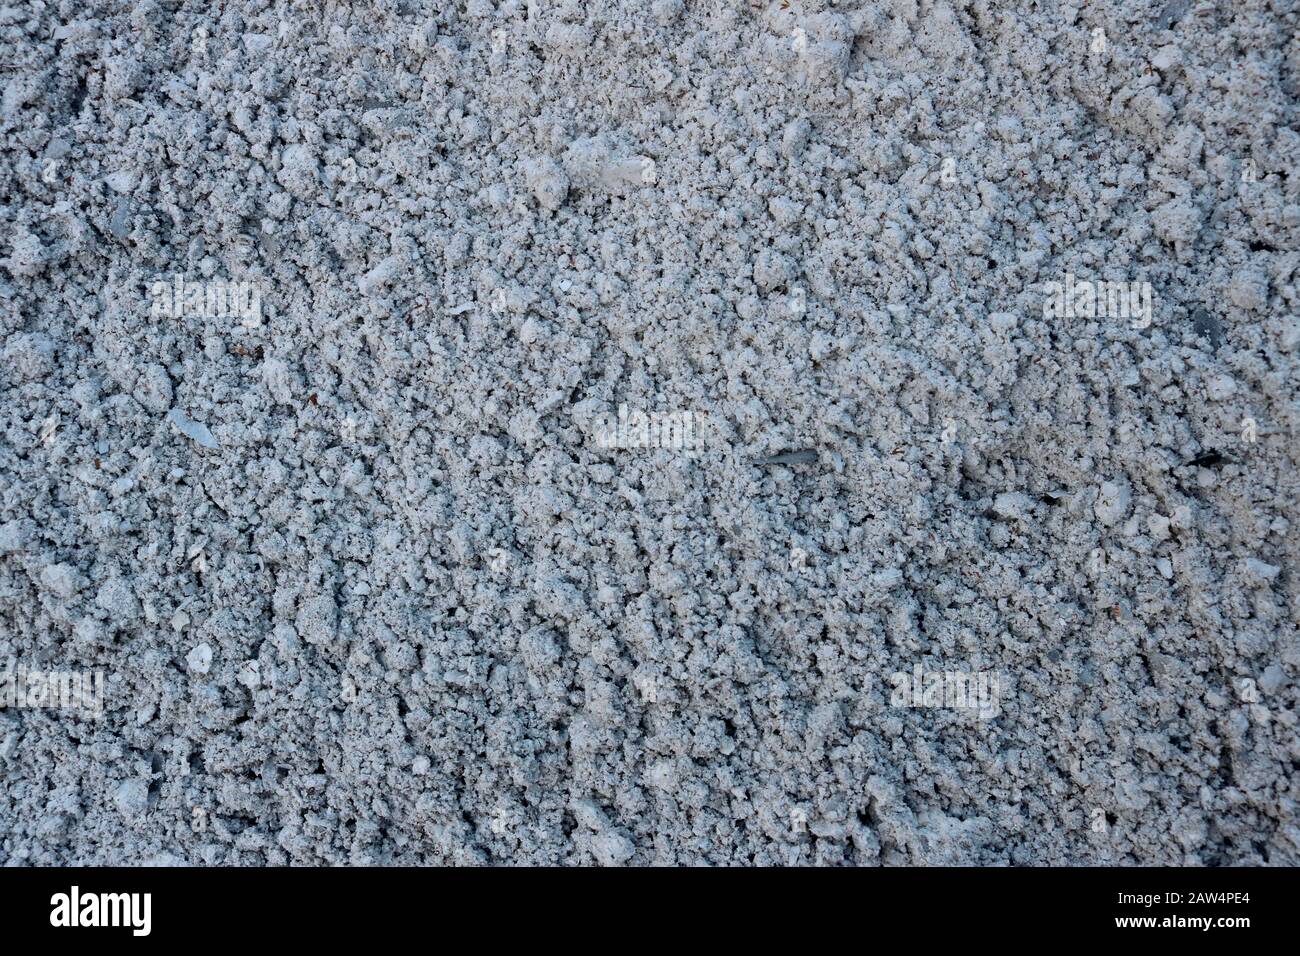 Wet gray ashes as a wallpaper Stock Photo